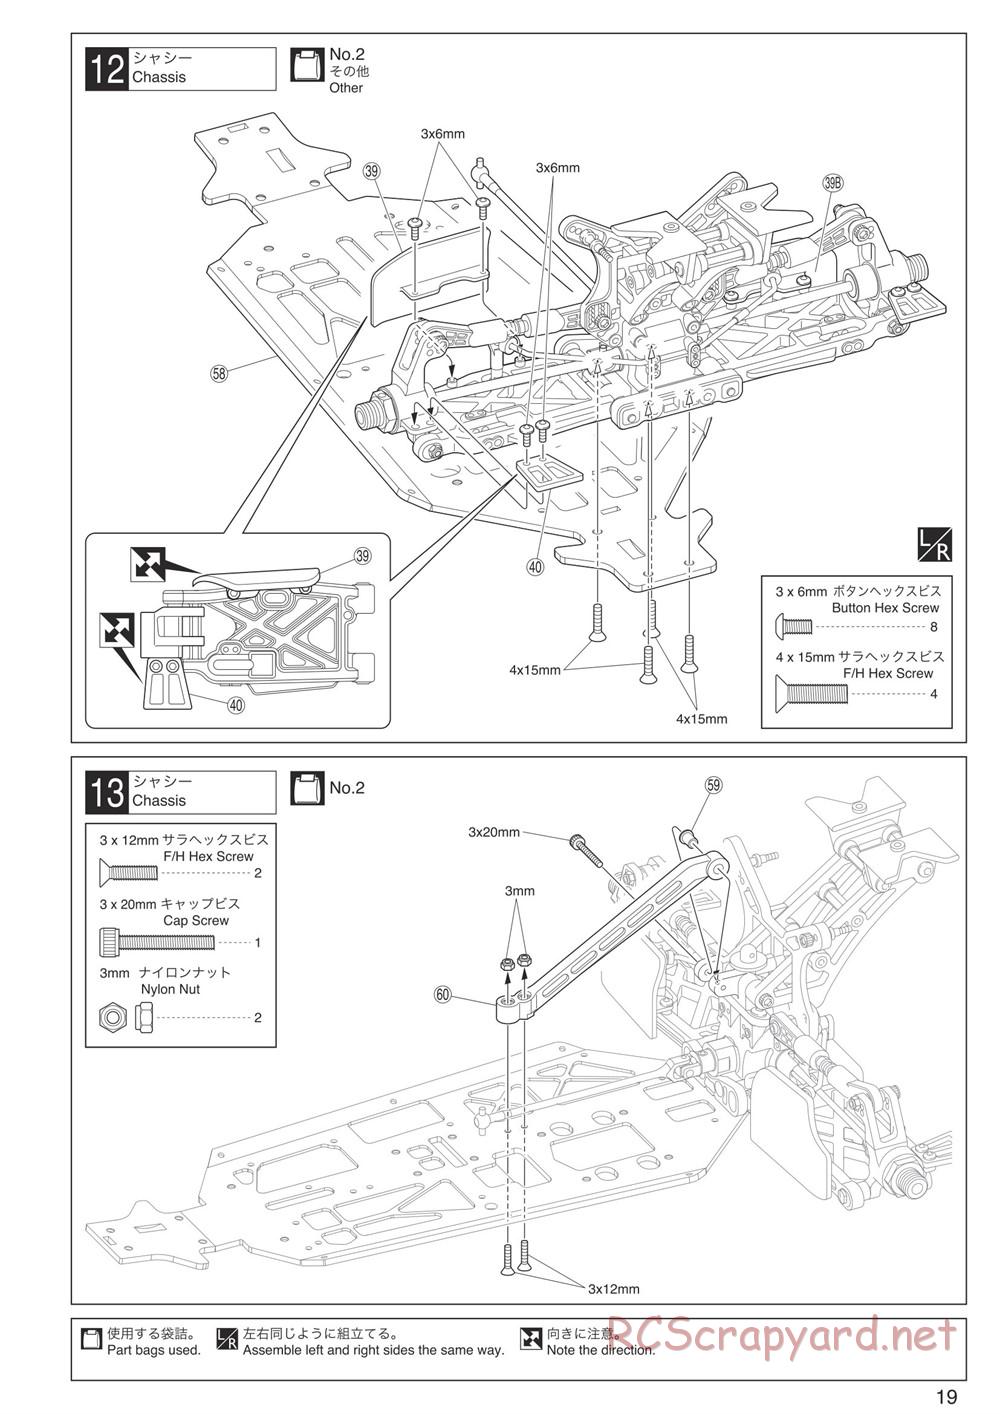 Kyosho - Inferno MP9 TKI4 10th Anniversary Special Edition - Manual - Page 19